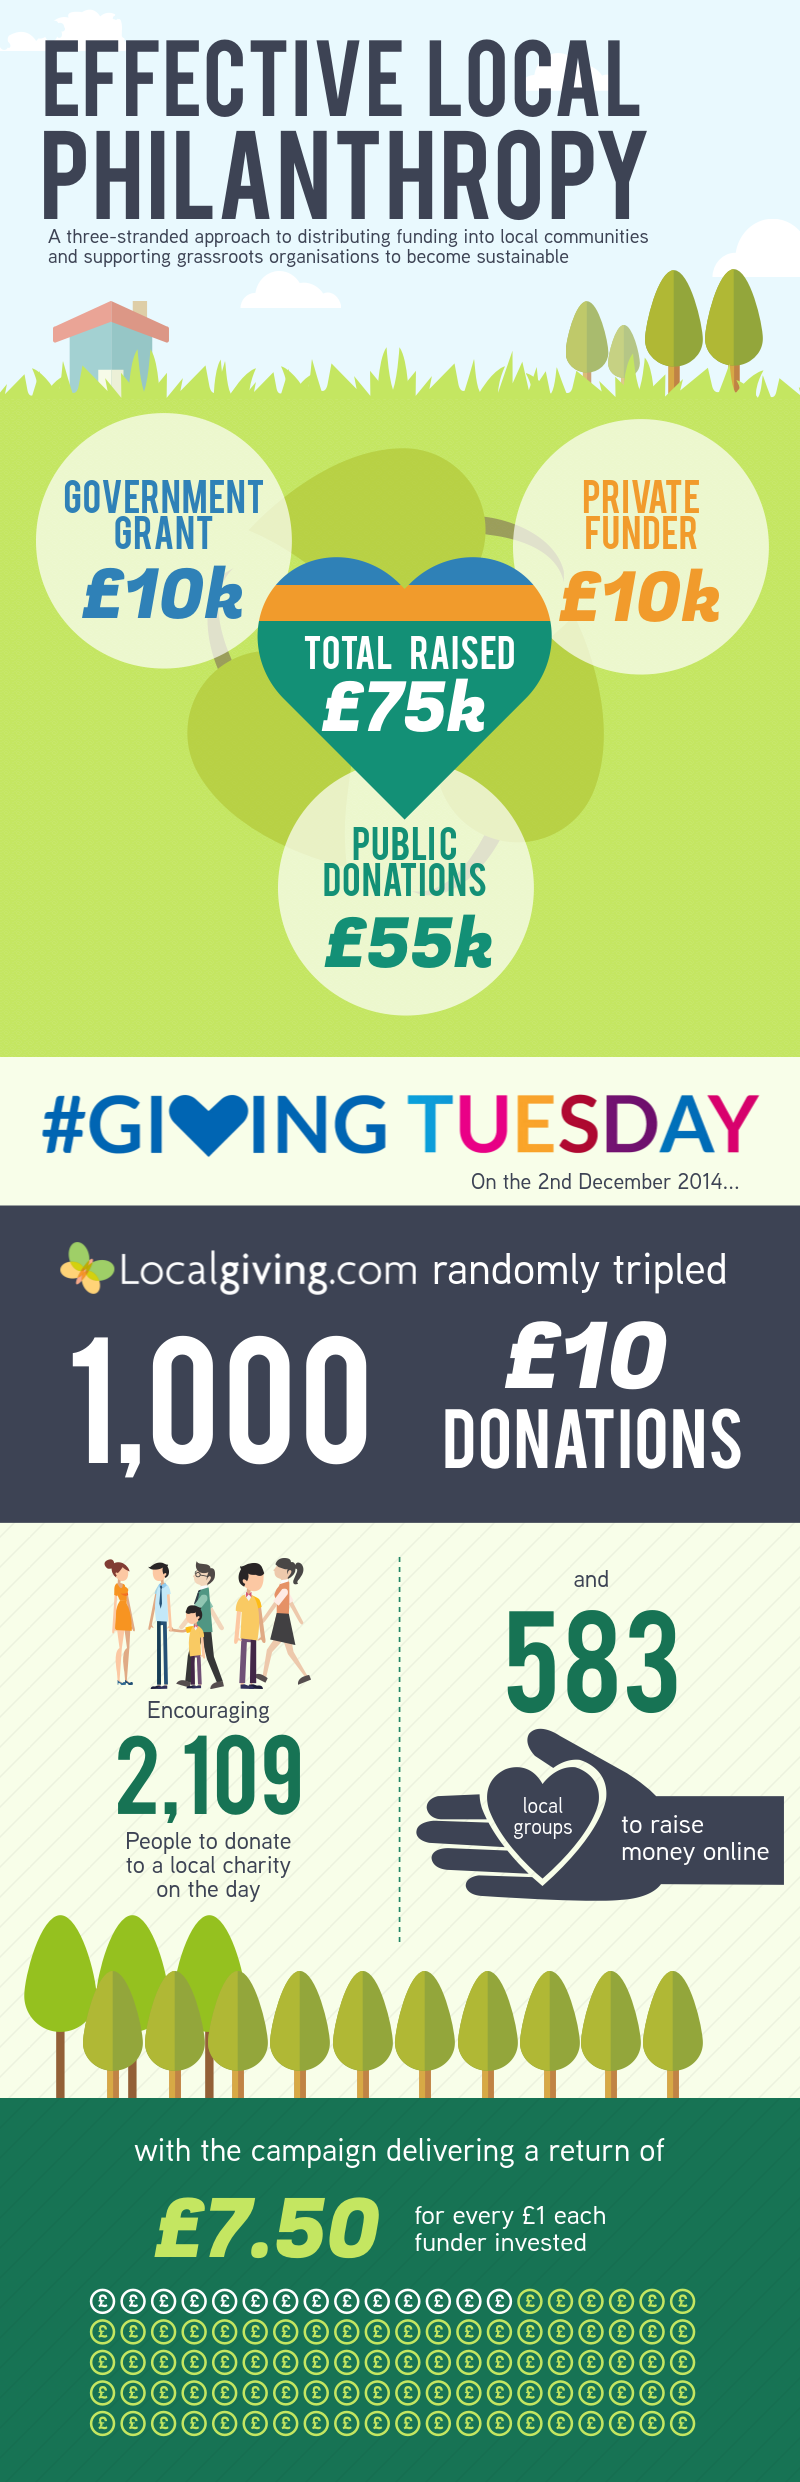 On Tuesday the 2nd of December 2014, Localgiving, the leading support network for local charities, took part in the UK’s first ever #GivingTuesday. As founding partner, Localgiving launched its Triple Tenner Tuesday initiative, tripling 1,000 £10 online donations made to local charities through the platform on the day. In just 24 hours, the campaign raised over £75,000 for more than 550 community groups, allowing them to truly benefit from #GivingTuesday.